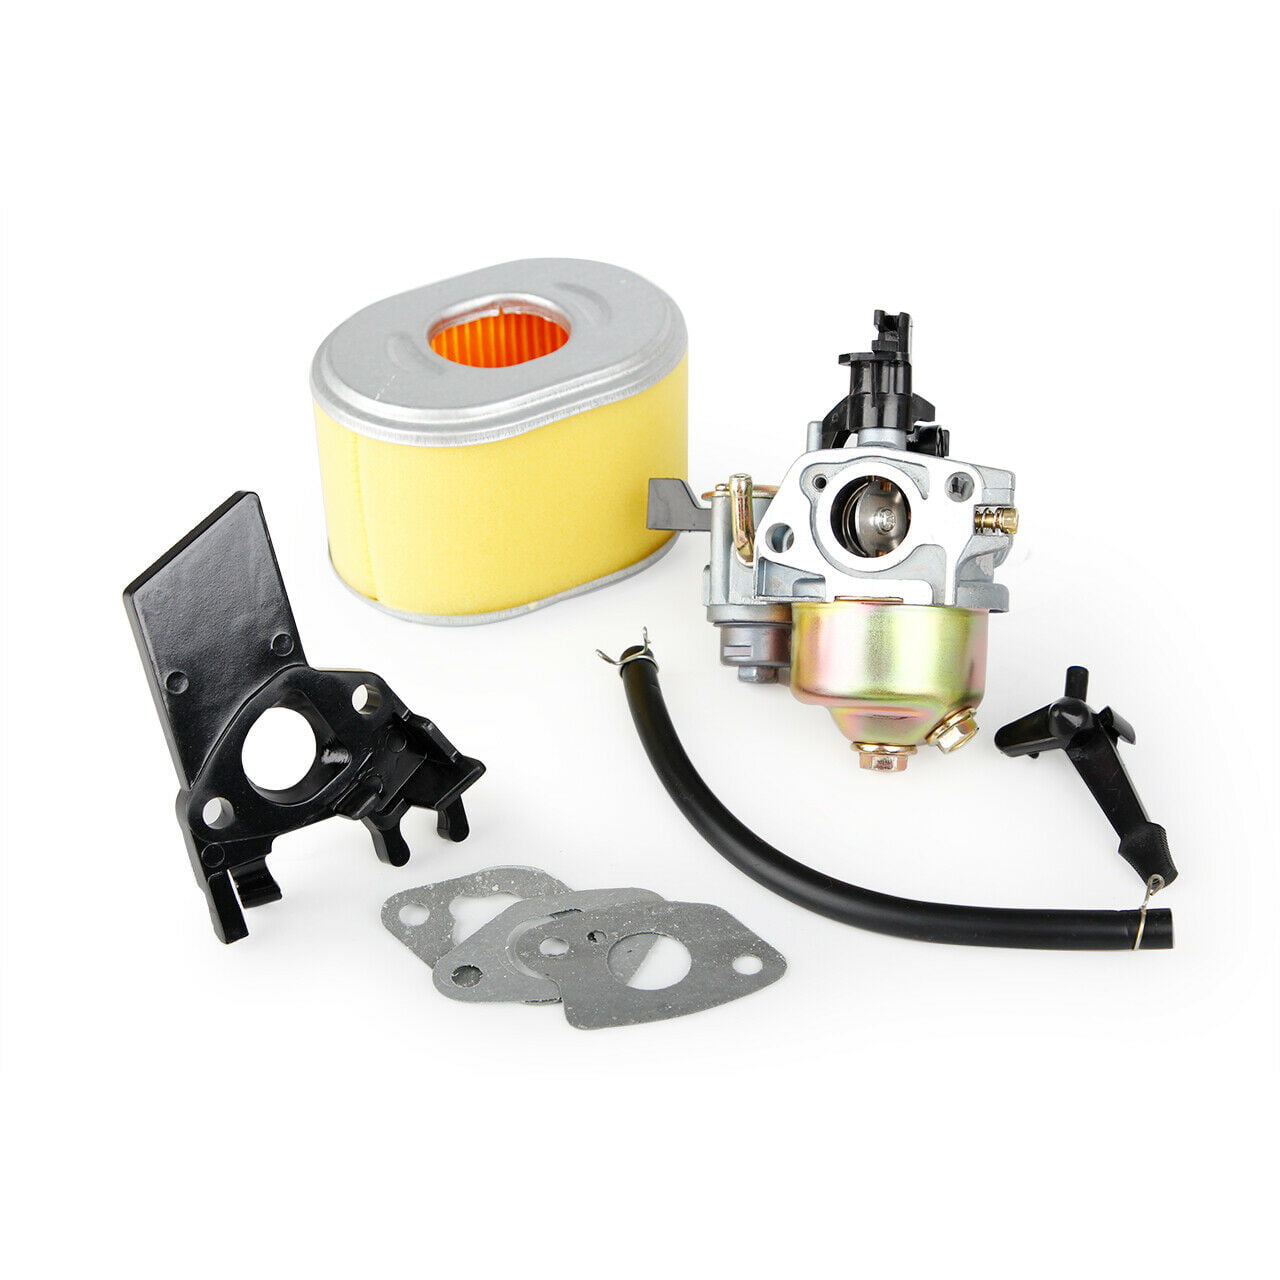 Details about   Carburetor Tune Up kit For Honda GX160 GX200 5.5HP 6.5HP Pressure Washer Engine 